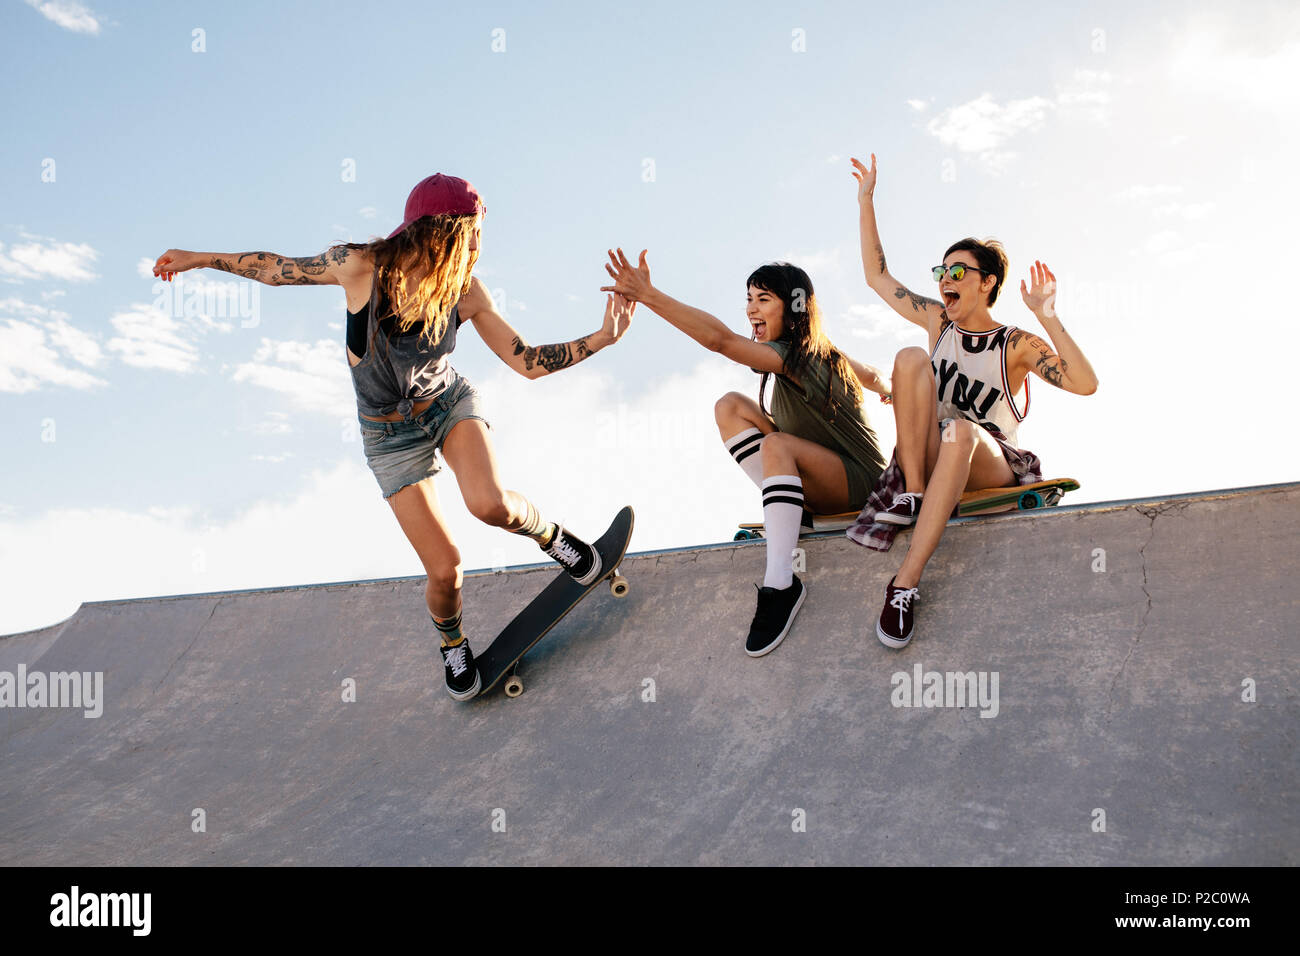 Female skateboarder riding skateboard at skate park with friends sitting on  ramp having fun. Woman skater giving high five to female friend sitting on  Stock Photo - Alamy